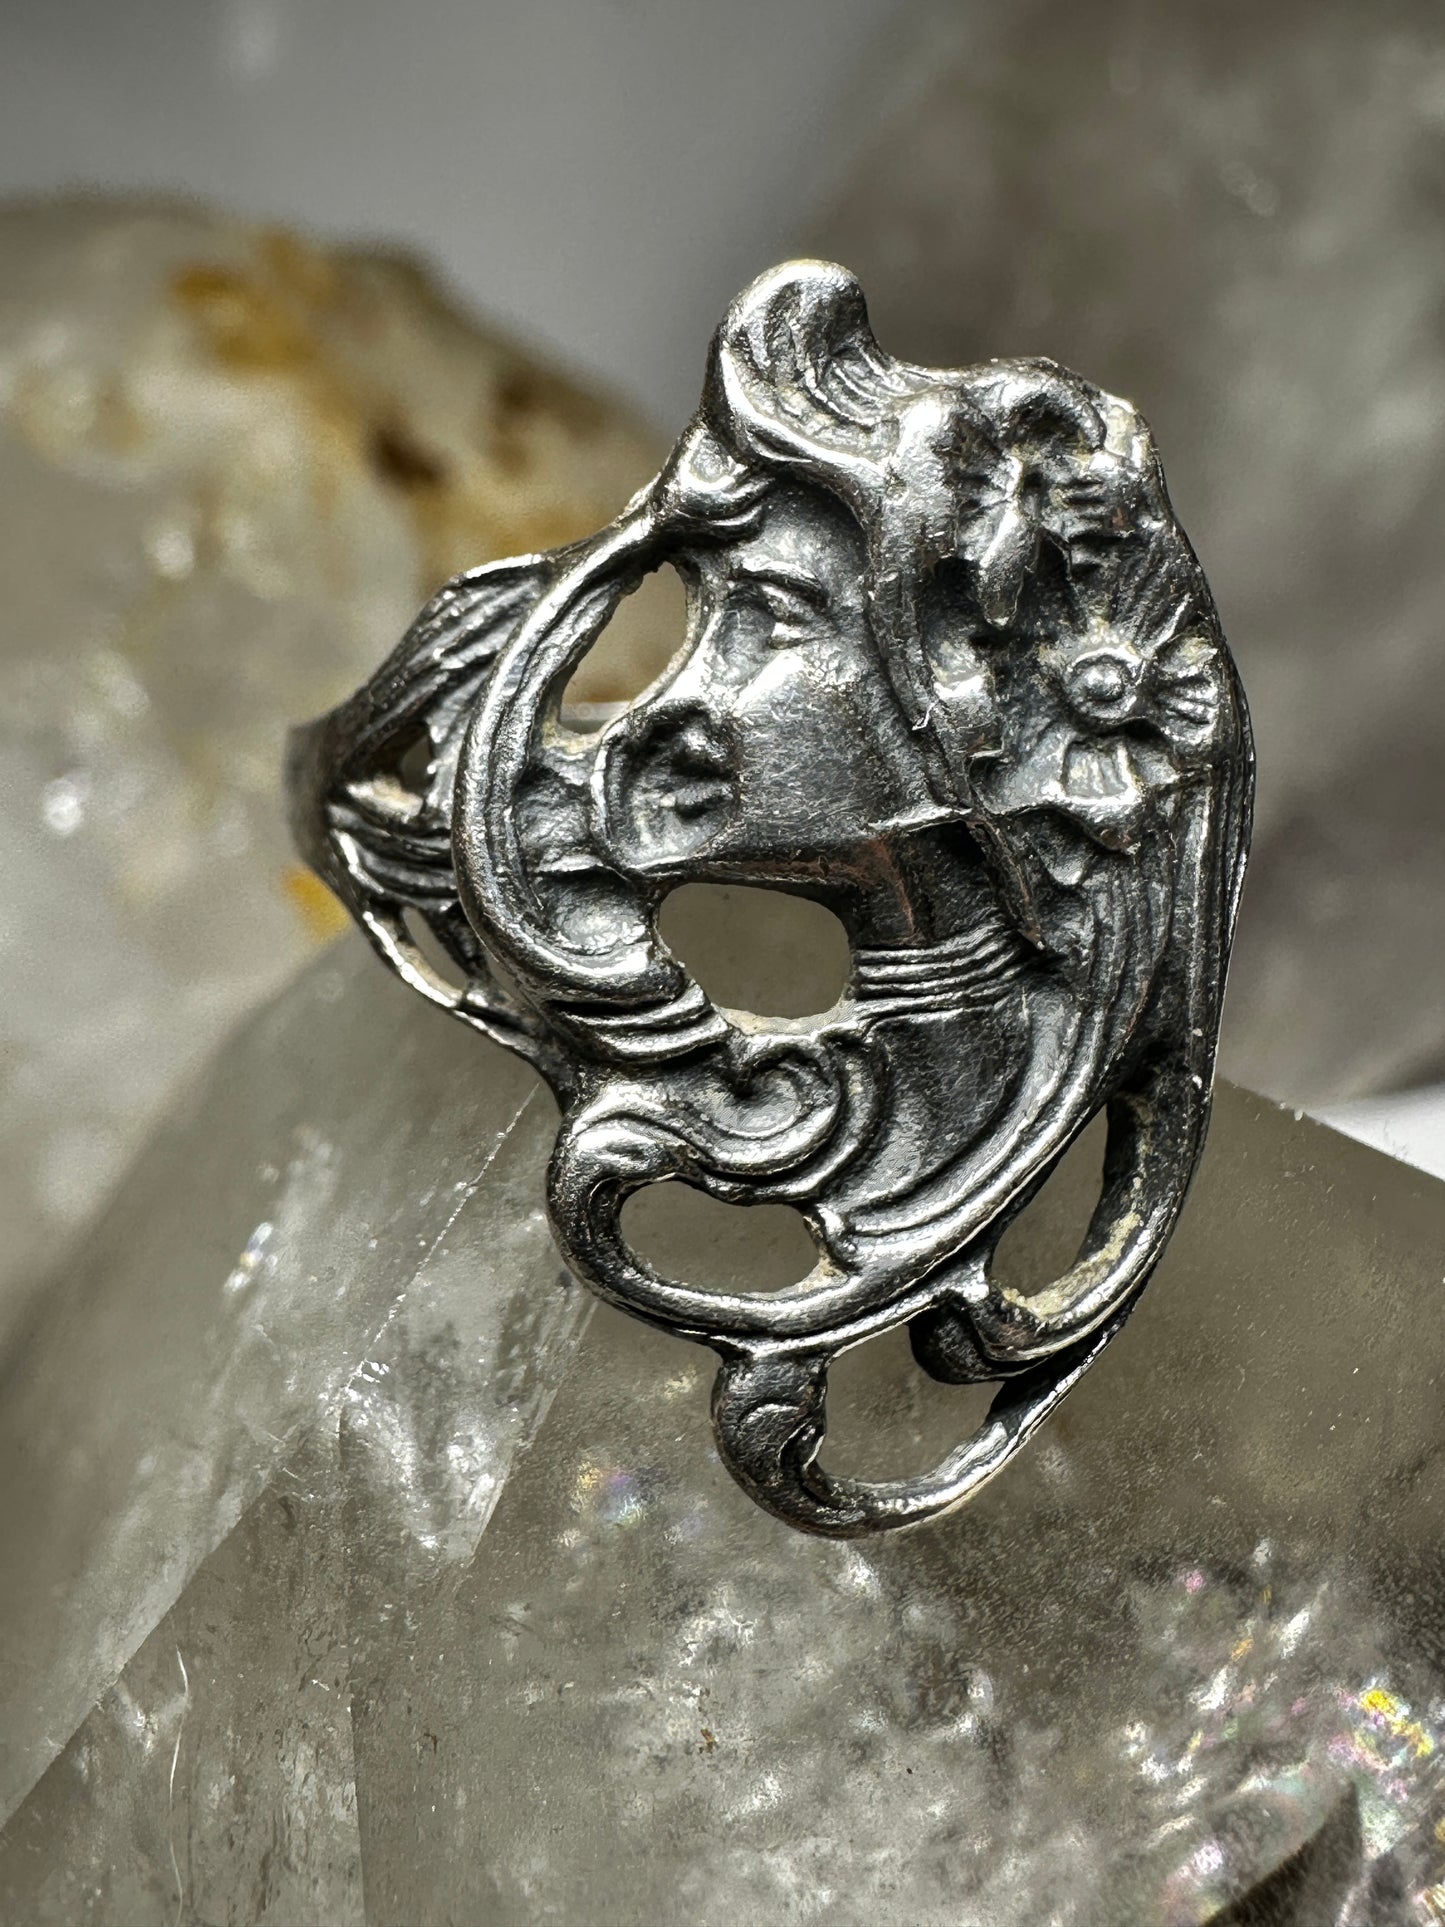 Lady Face ring size 7.75 Art Deco sterling silver women